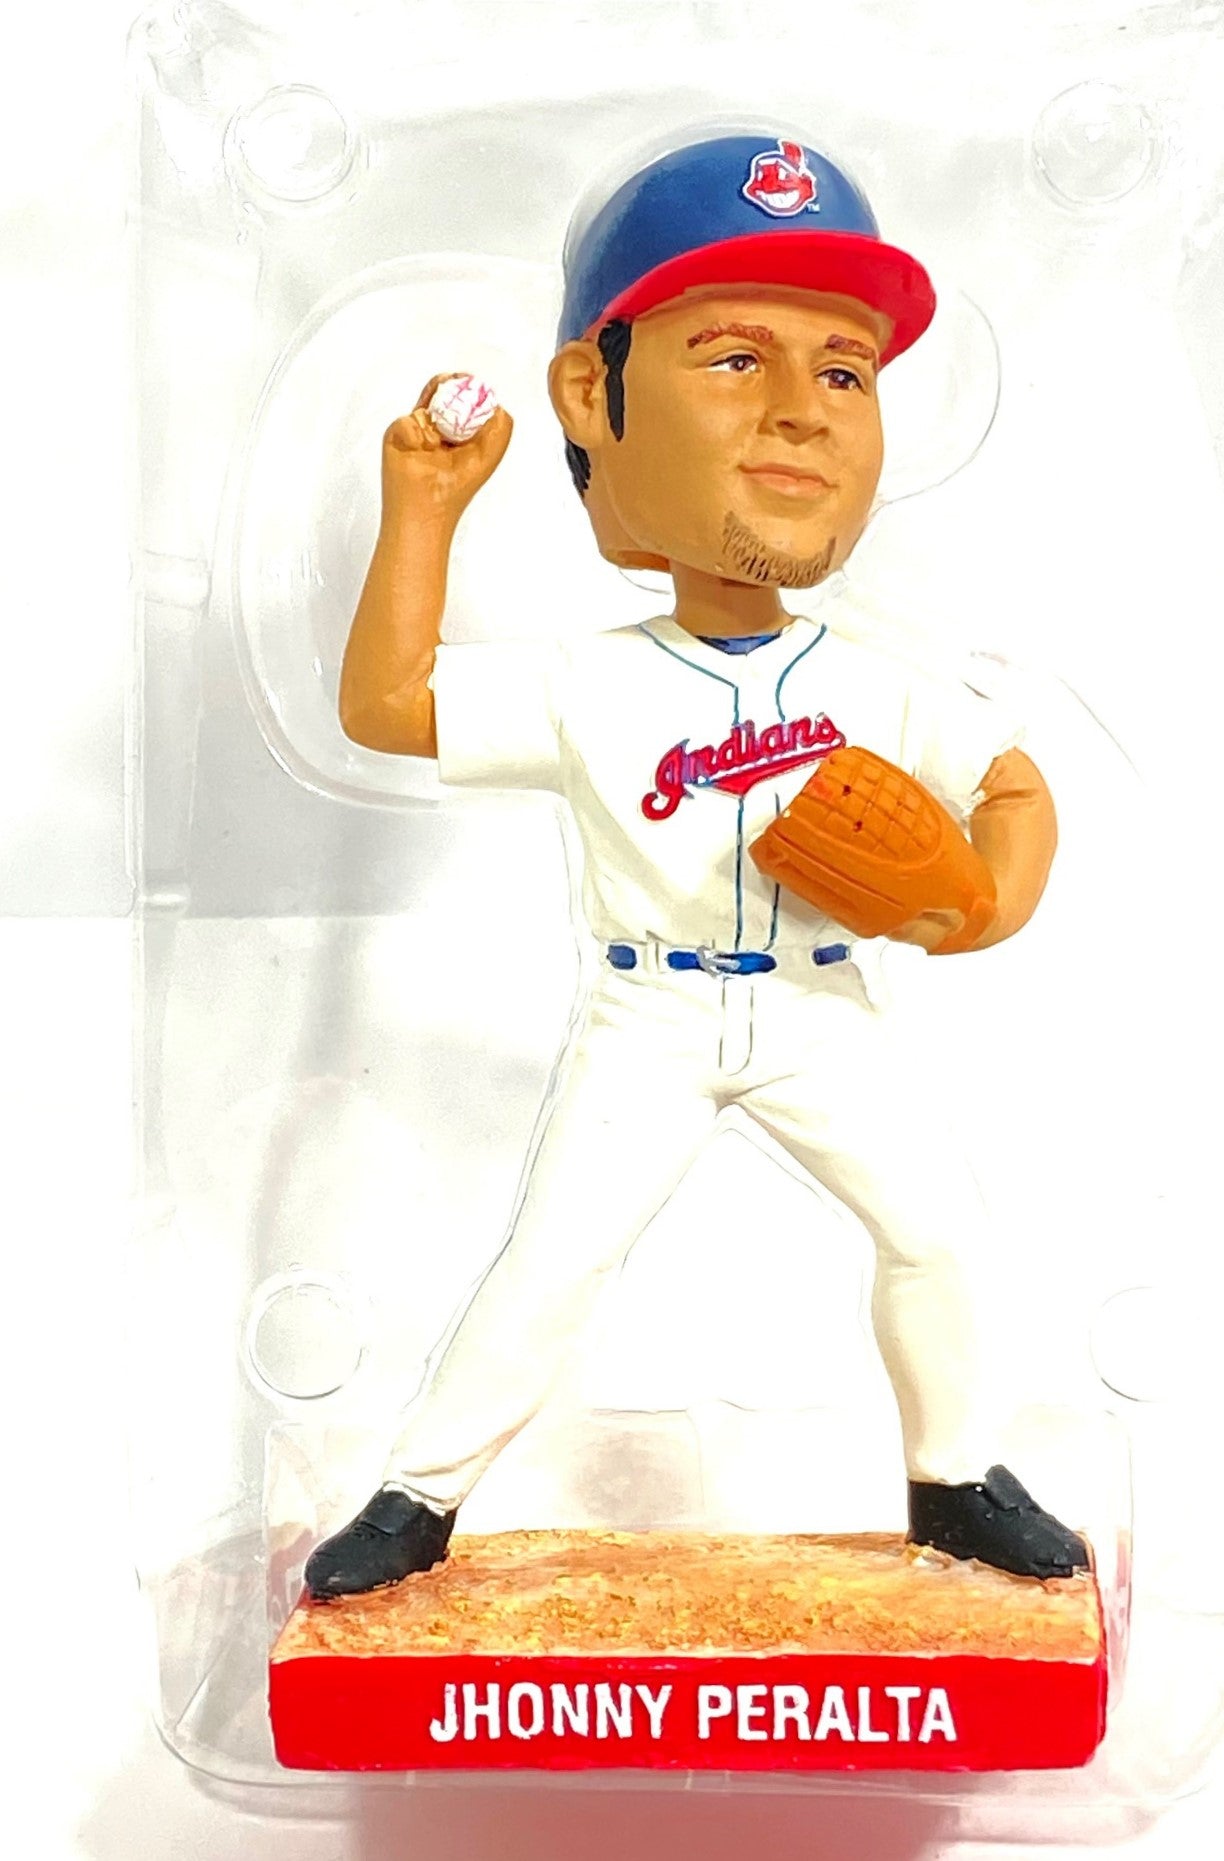 Jhonny Peralta 2008 MLB Cleveland Indians MLB Bobblehead (Used) By BD&A